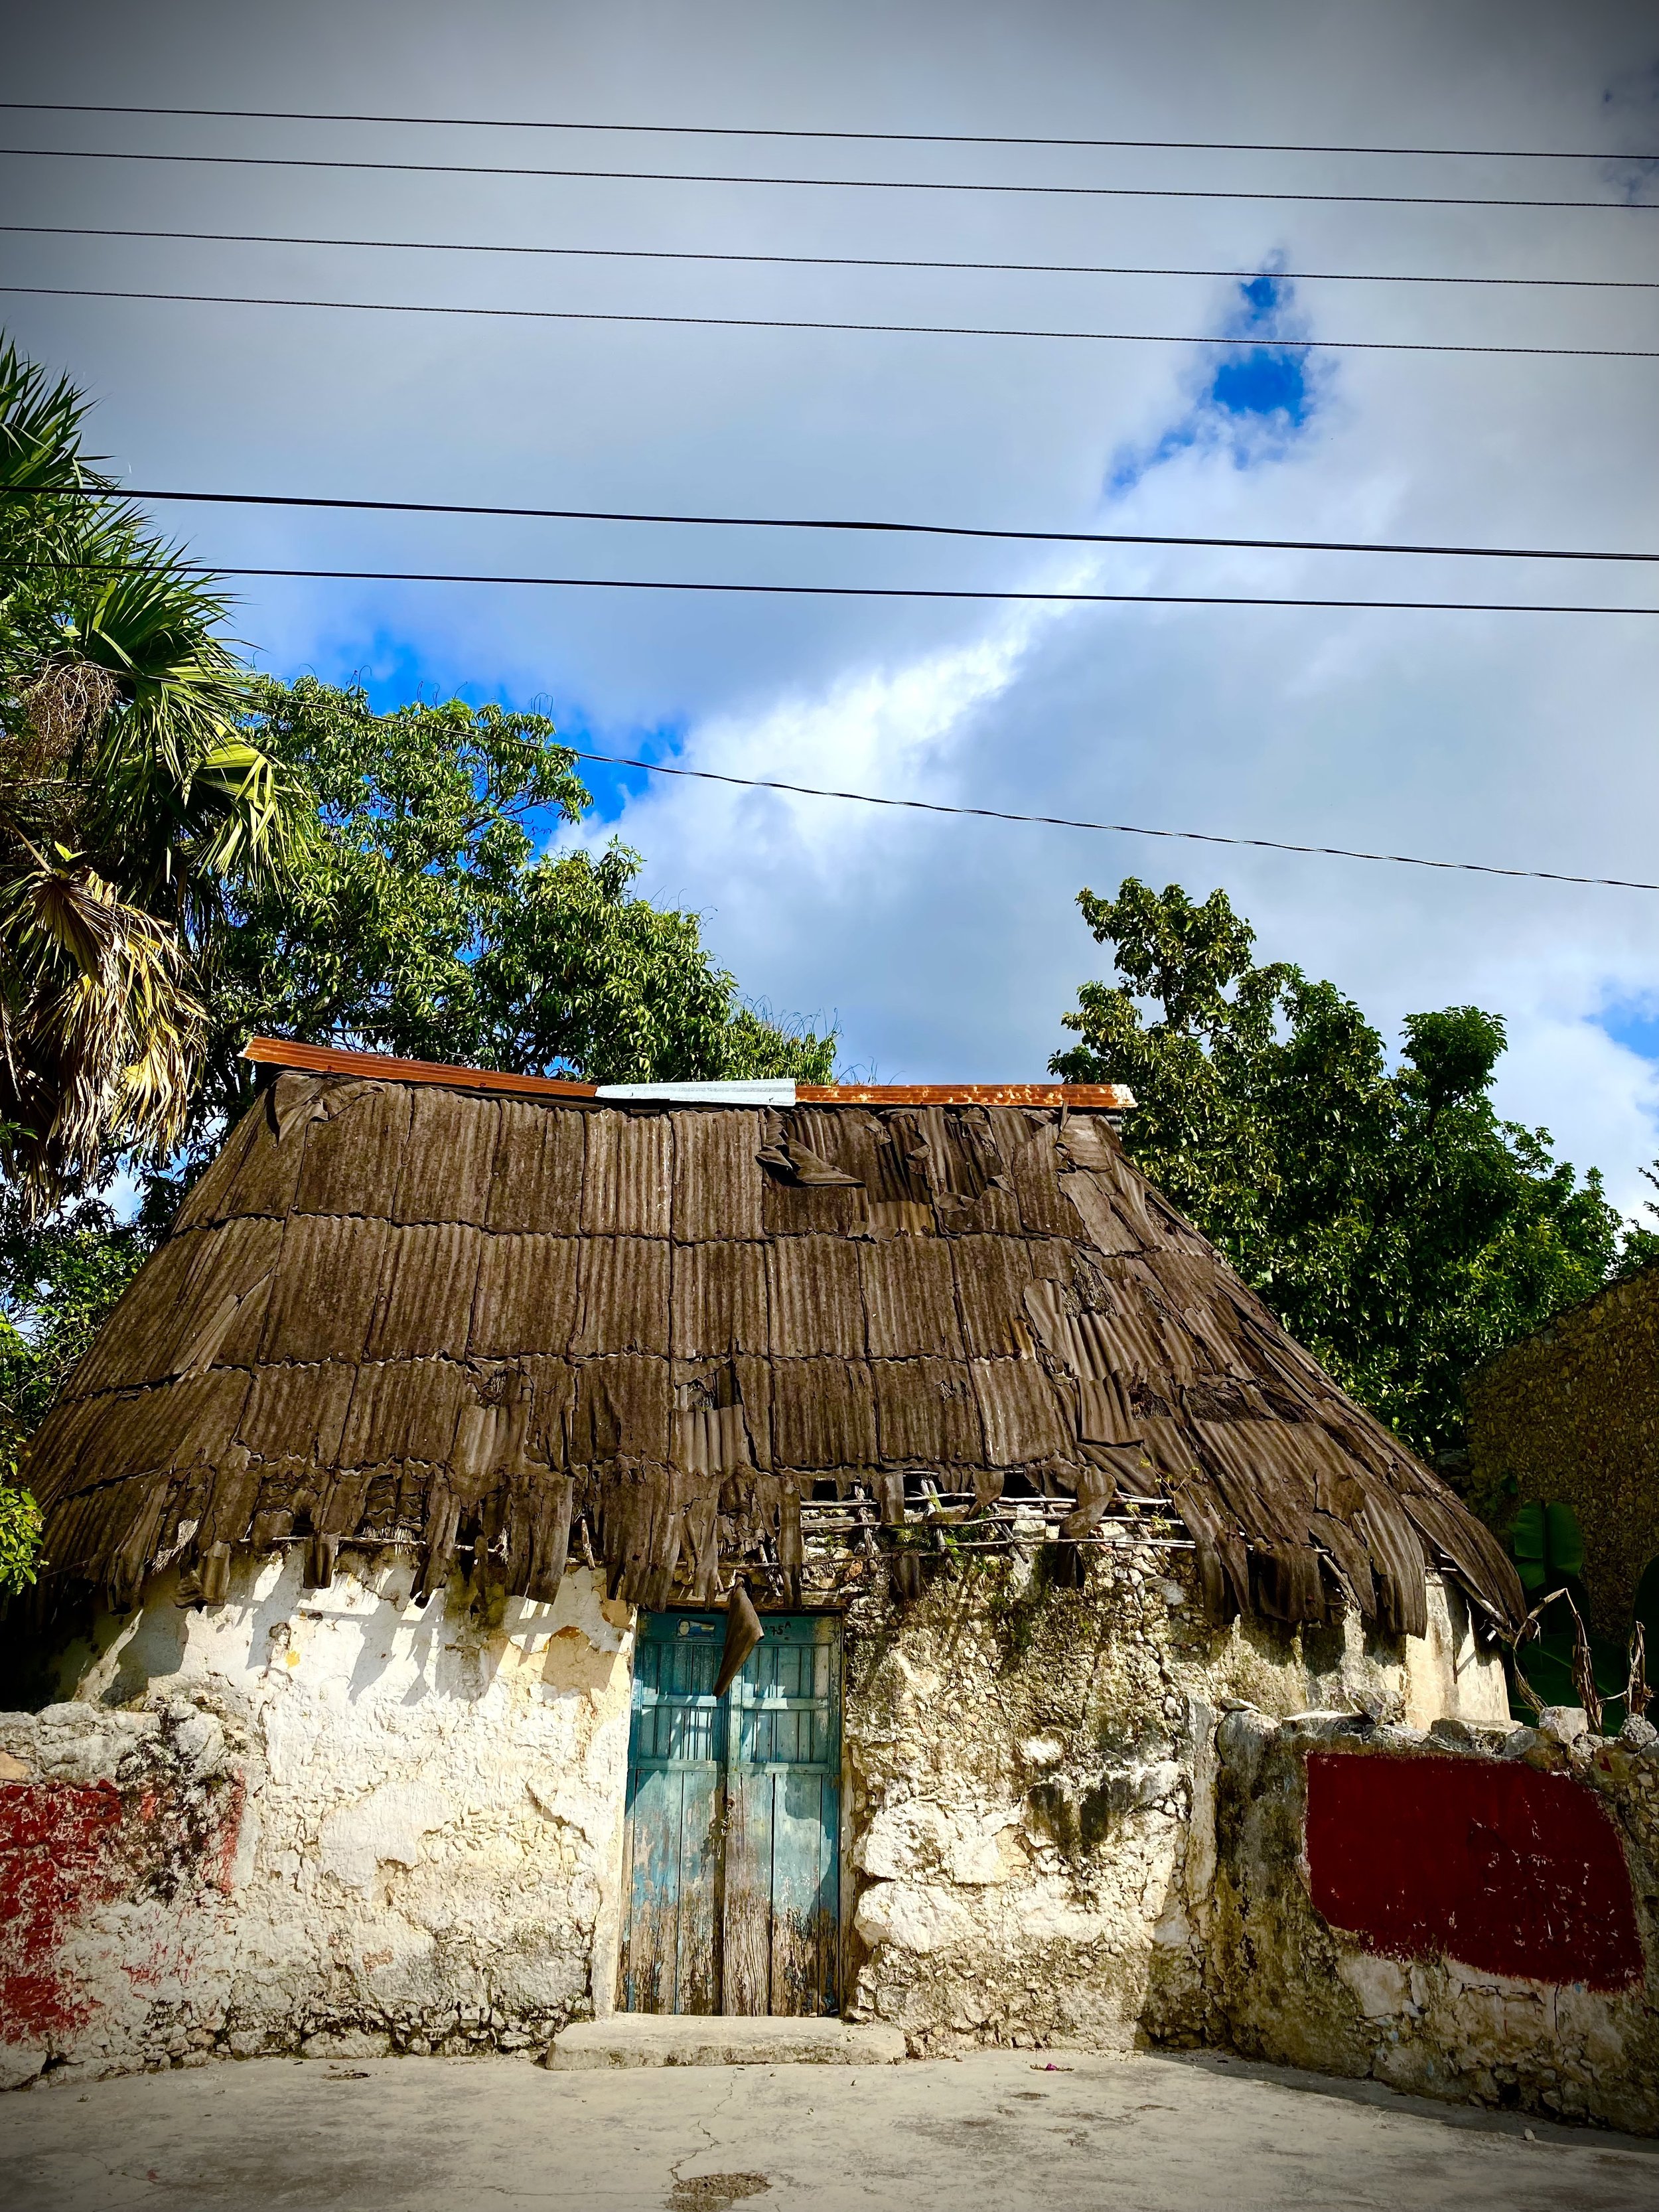 How To Experience Mayan Culture on the Yucatán Peninsula